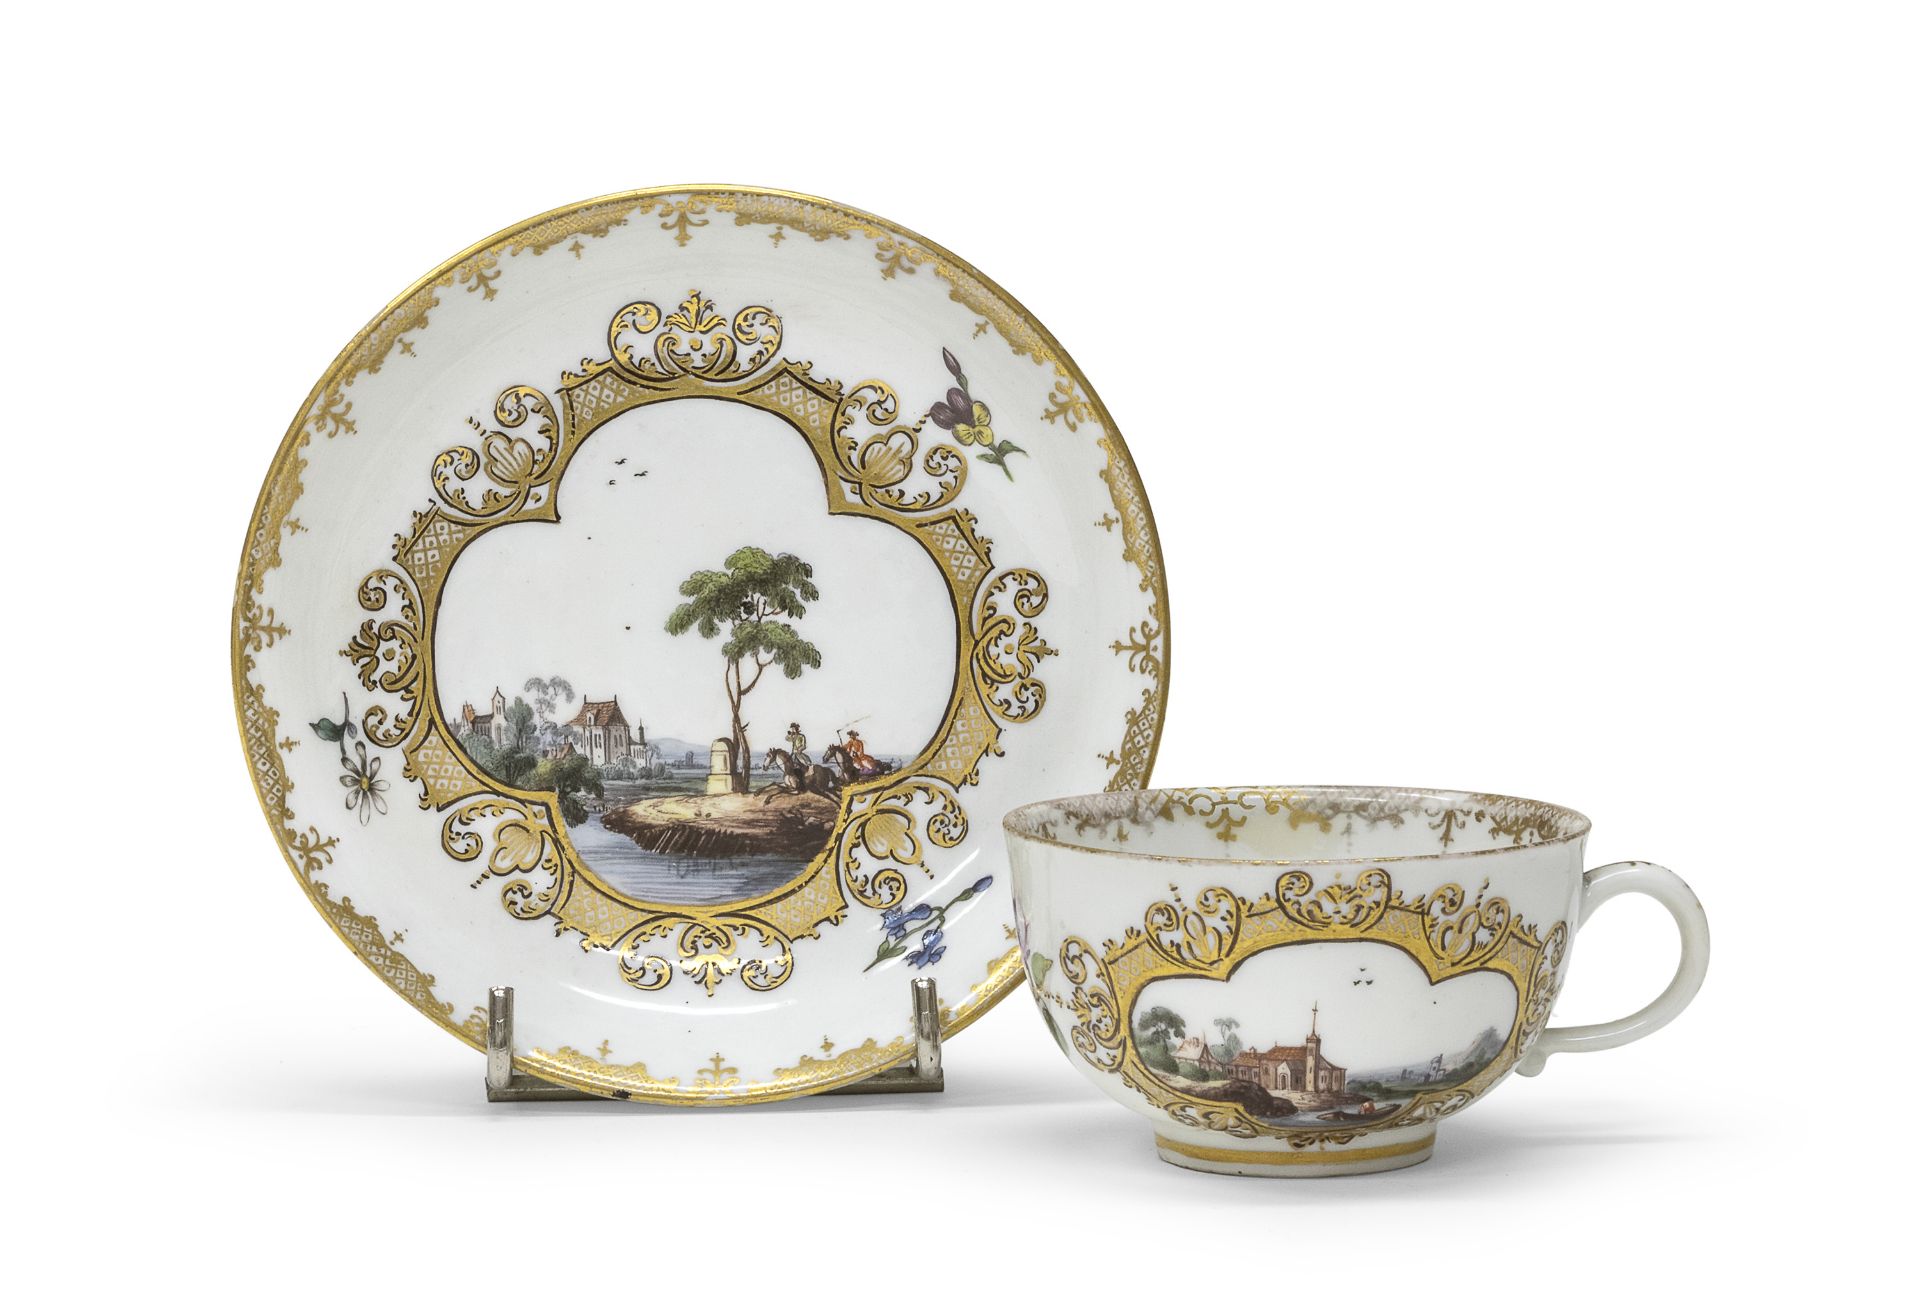 PORCELAIN CUP AND SAUCER MEISSEN FIRST HALF 18TH CENTURY